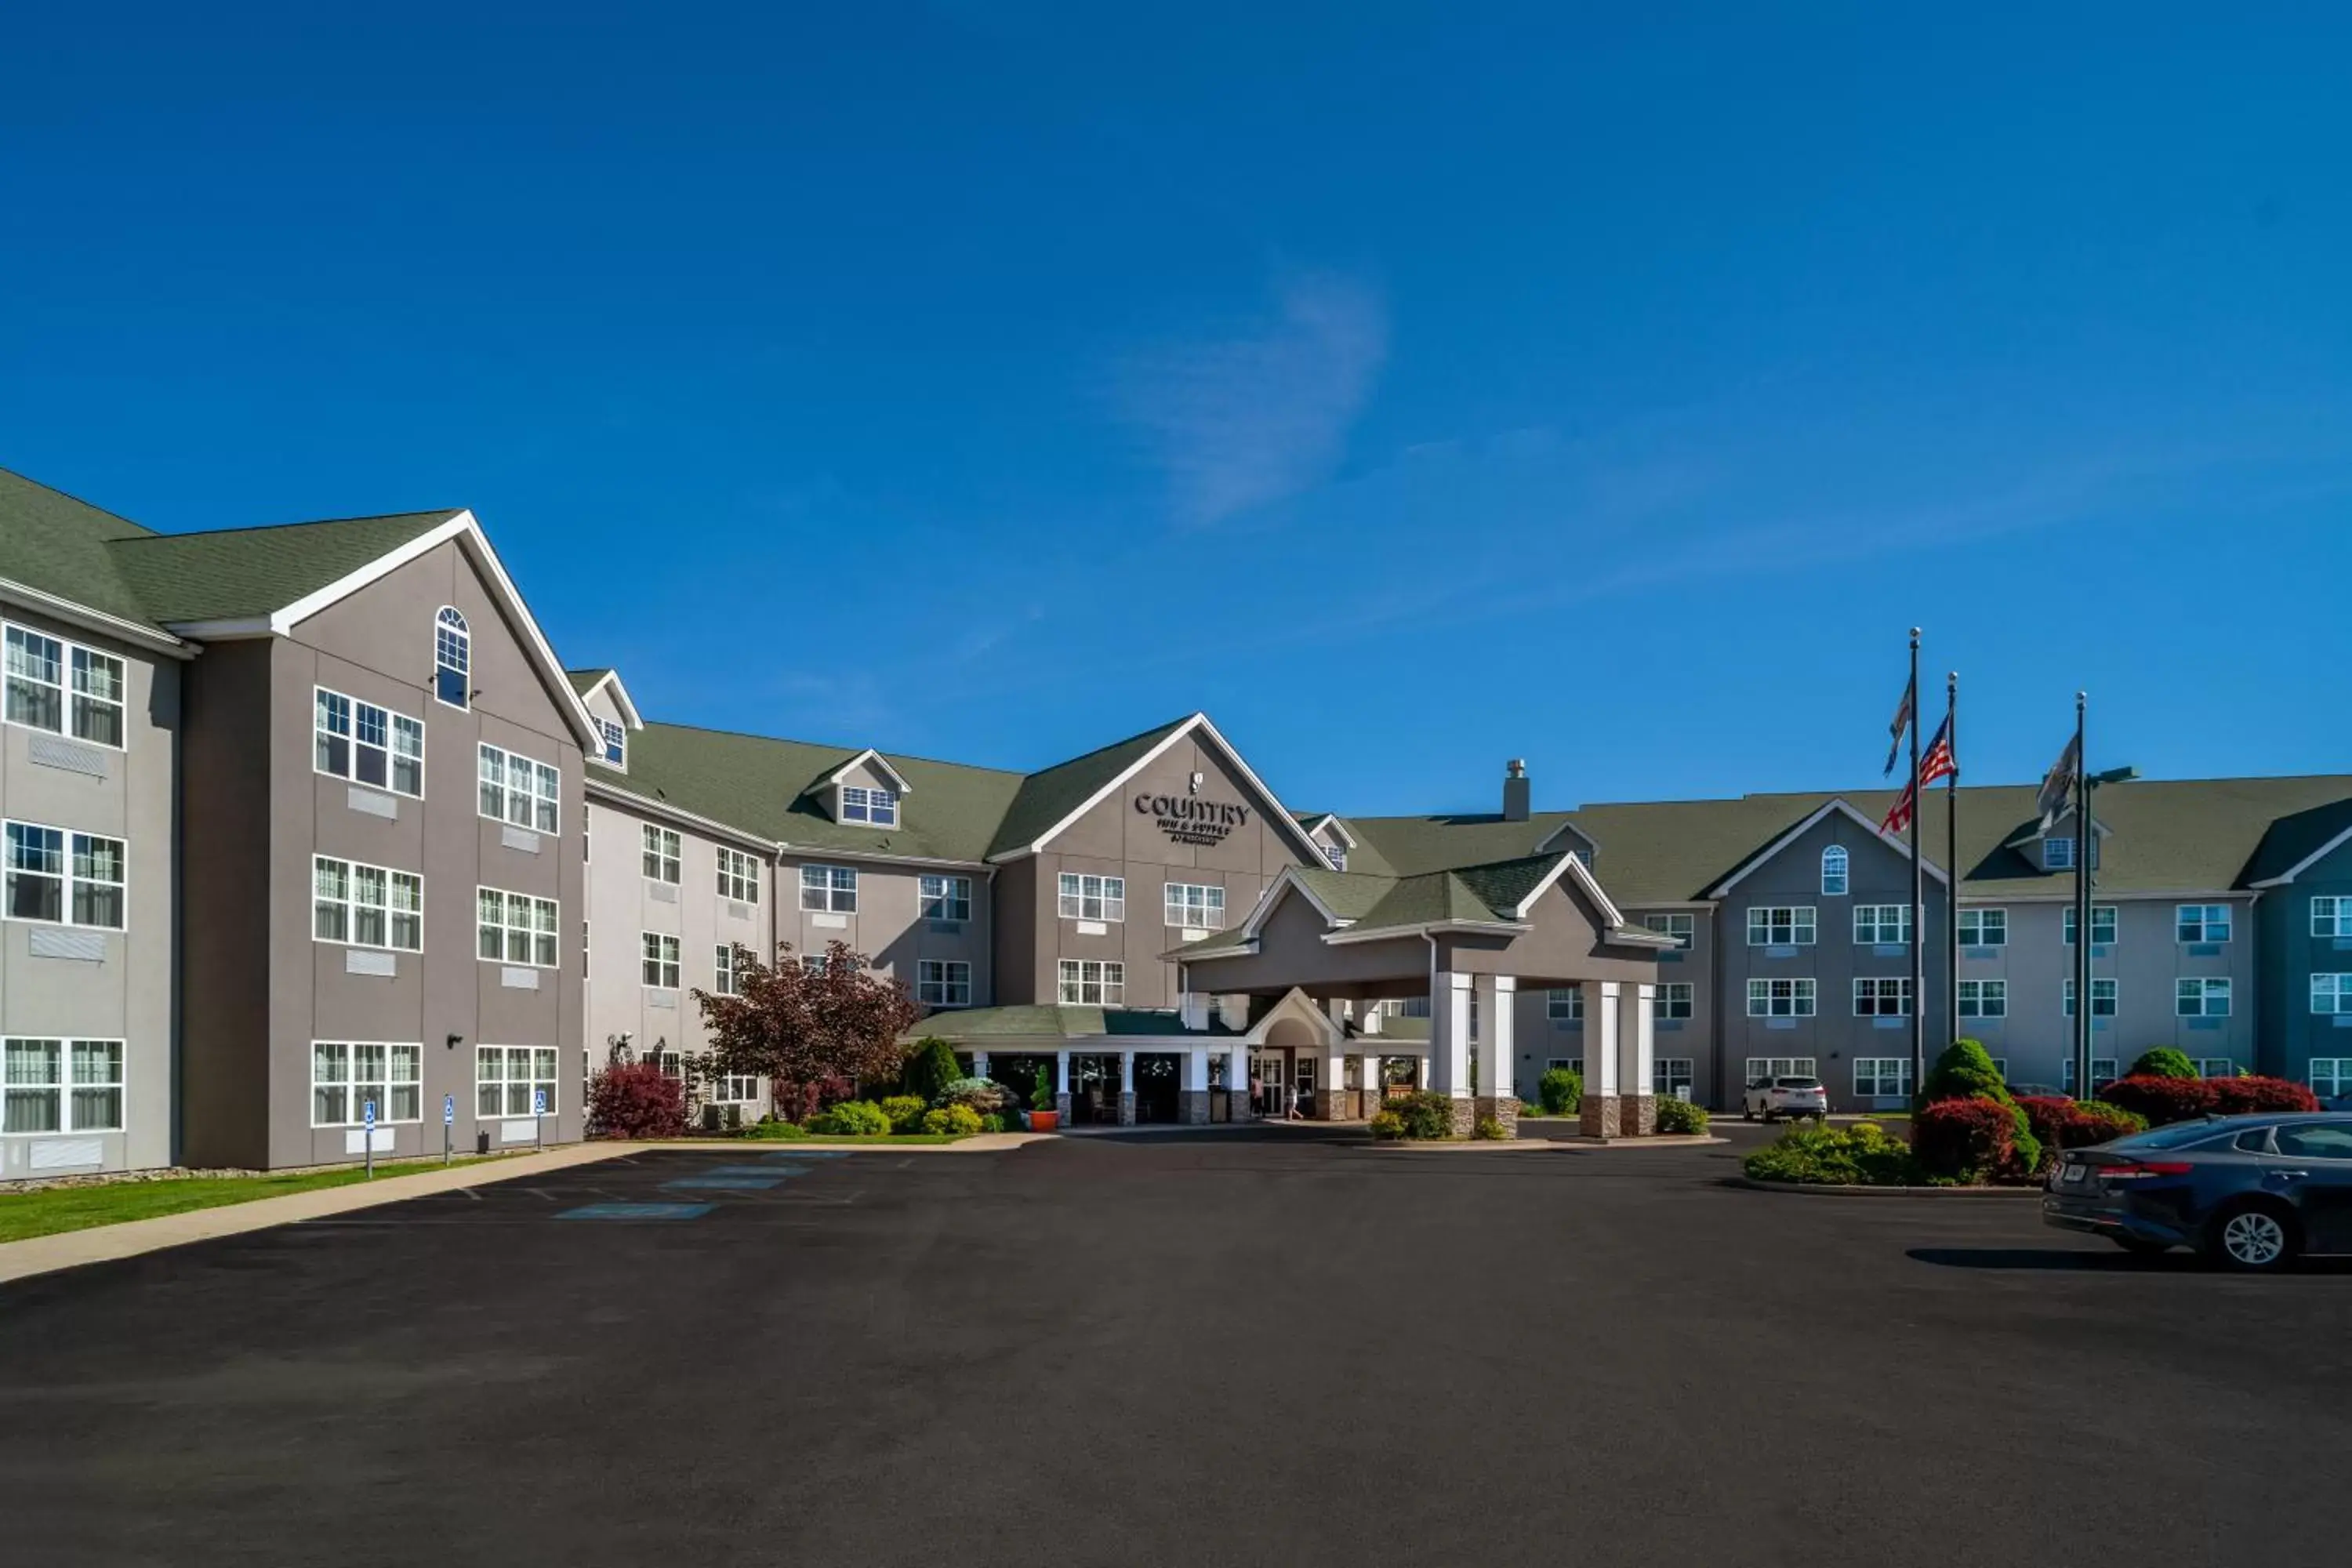 Facade/entrance, Property Building in Country Inn & Suites by Radisson, Beckley, WV